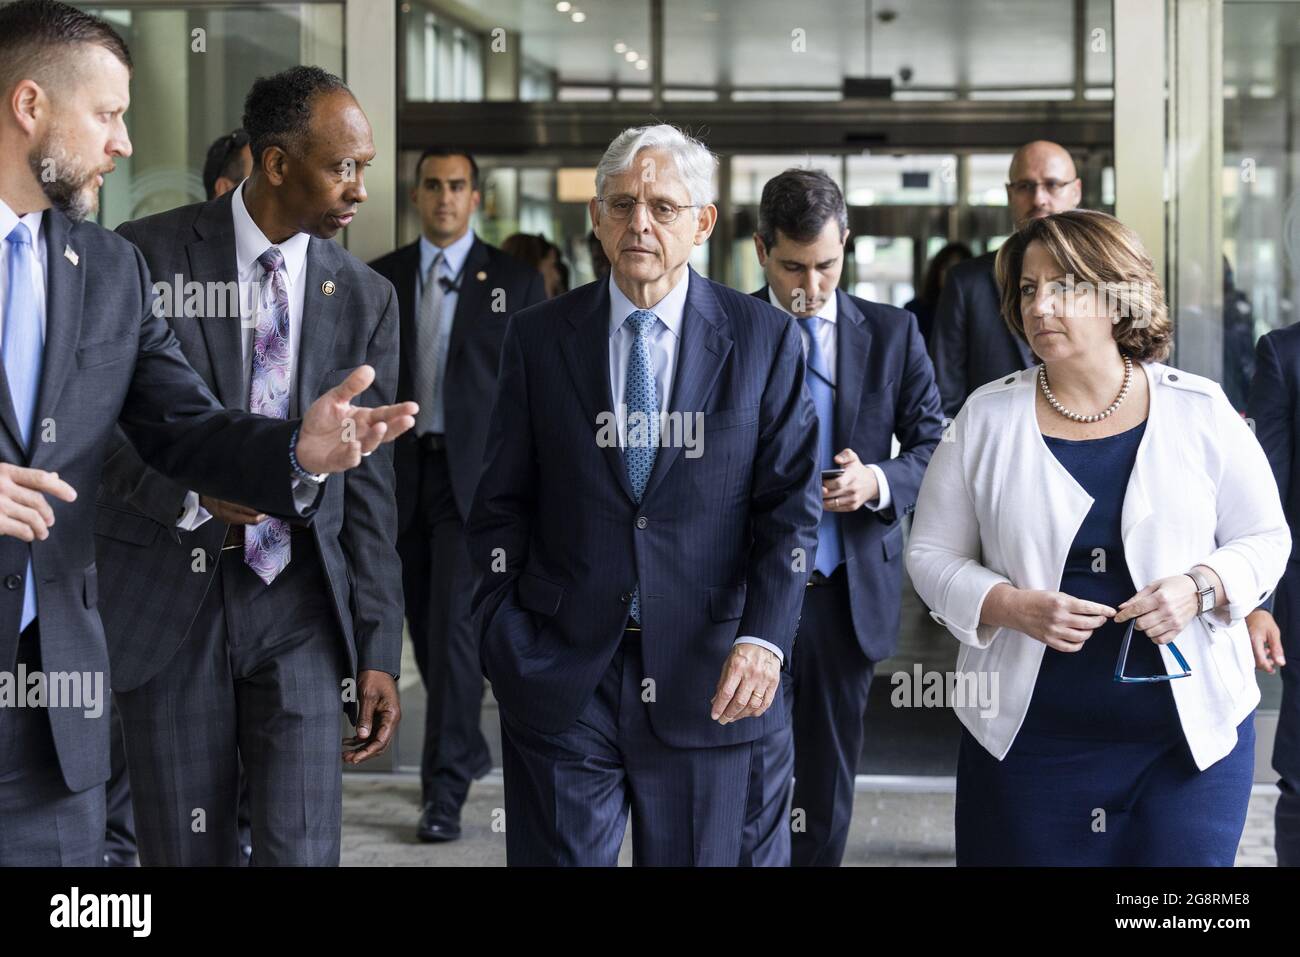 US Attorney General Merrick Garland (C), along with Deputy Attorney General Lisa Monaco (R), and Acting Alcohol, Tobacco and Firearms (ATF) Director Marvin G. Richardson (C-L), departs after announcing the launch of the Justice Department's 'five cross-jurisdictional trafficking strike forces' at the ATF in Washington, DC, USA, 22 July, 2021. The strike forces will seek to reduce firearms trafficking corridors, with a focus on New York, Chicago, Los Angeles, the San Francisco Bay and Sacramento Region, and Washington, DC. Pool Photos by Jim Lo Scalzo/UPI Stock Photo